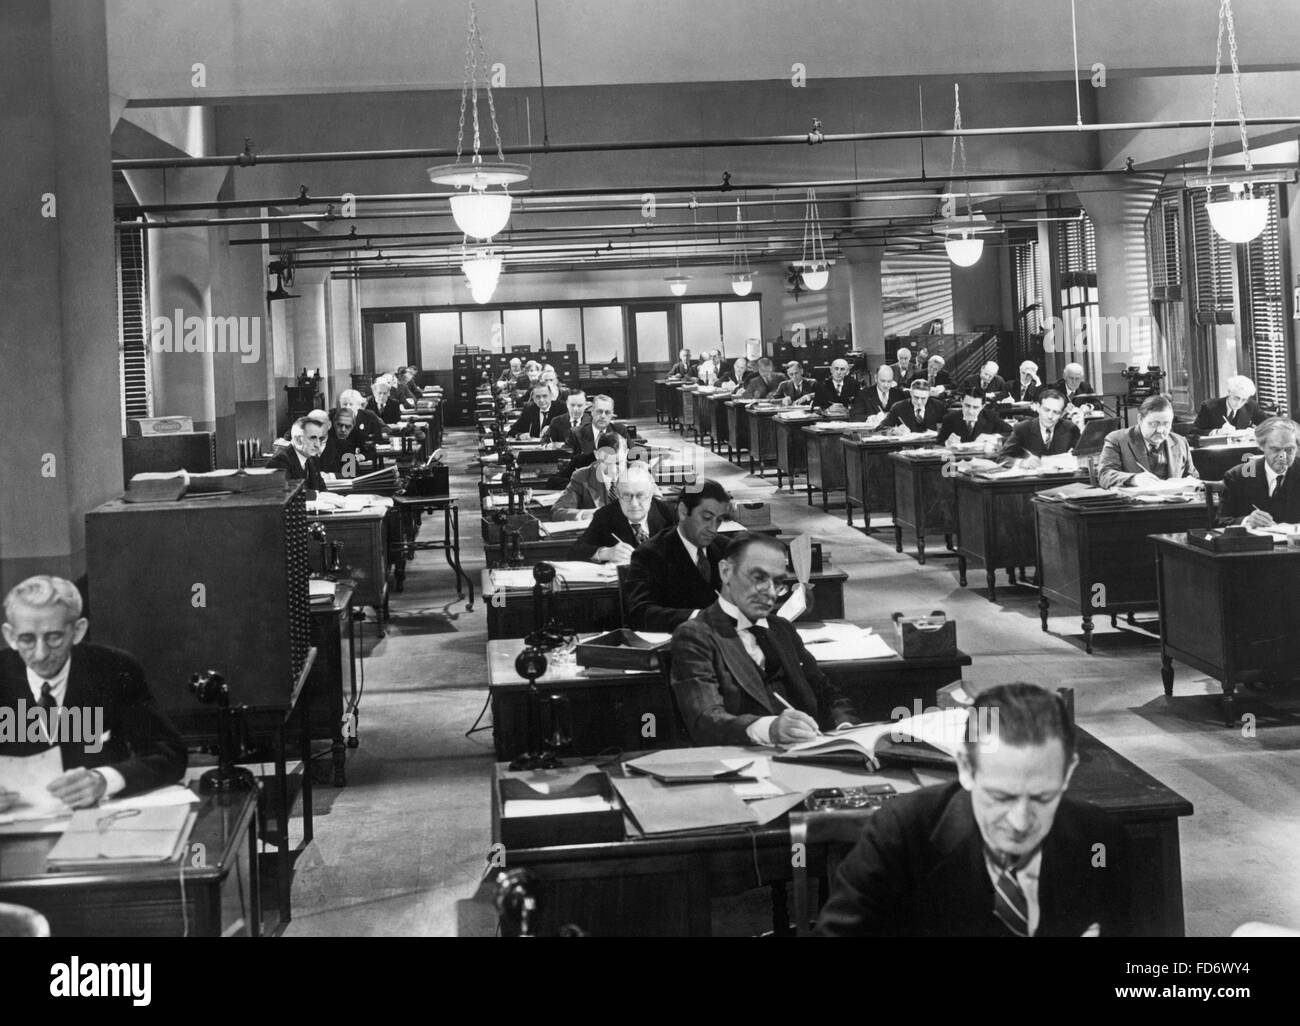 Employees at the desk, 1930s Stock Photo